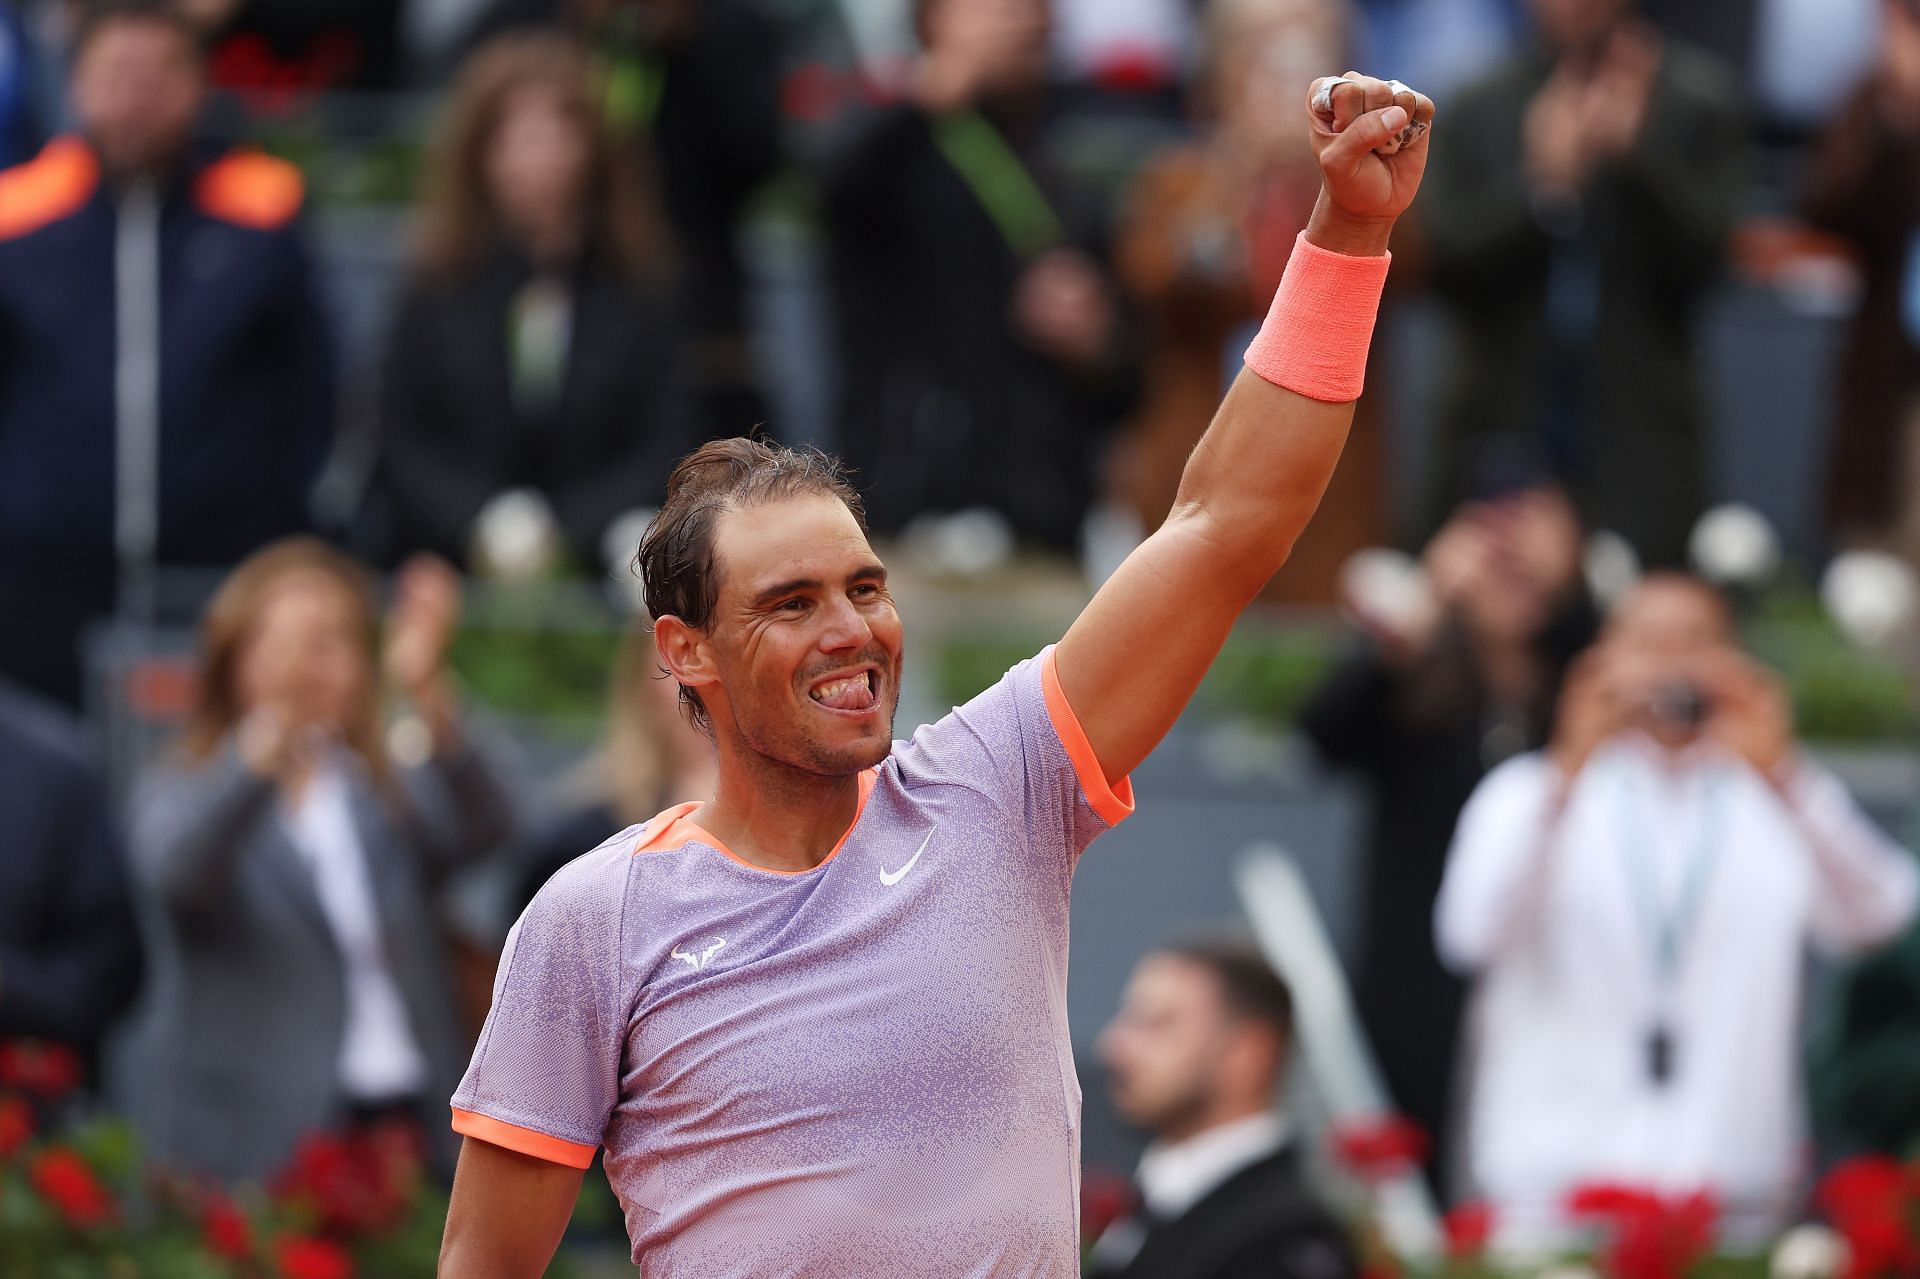 “I’m good” - Rafael Nadal jokes about defending his title in Bastad after 19 years, dispatches Leo Borg to kick off campaign in style